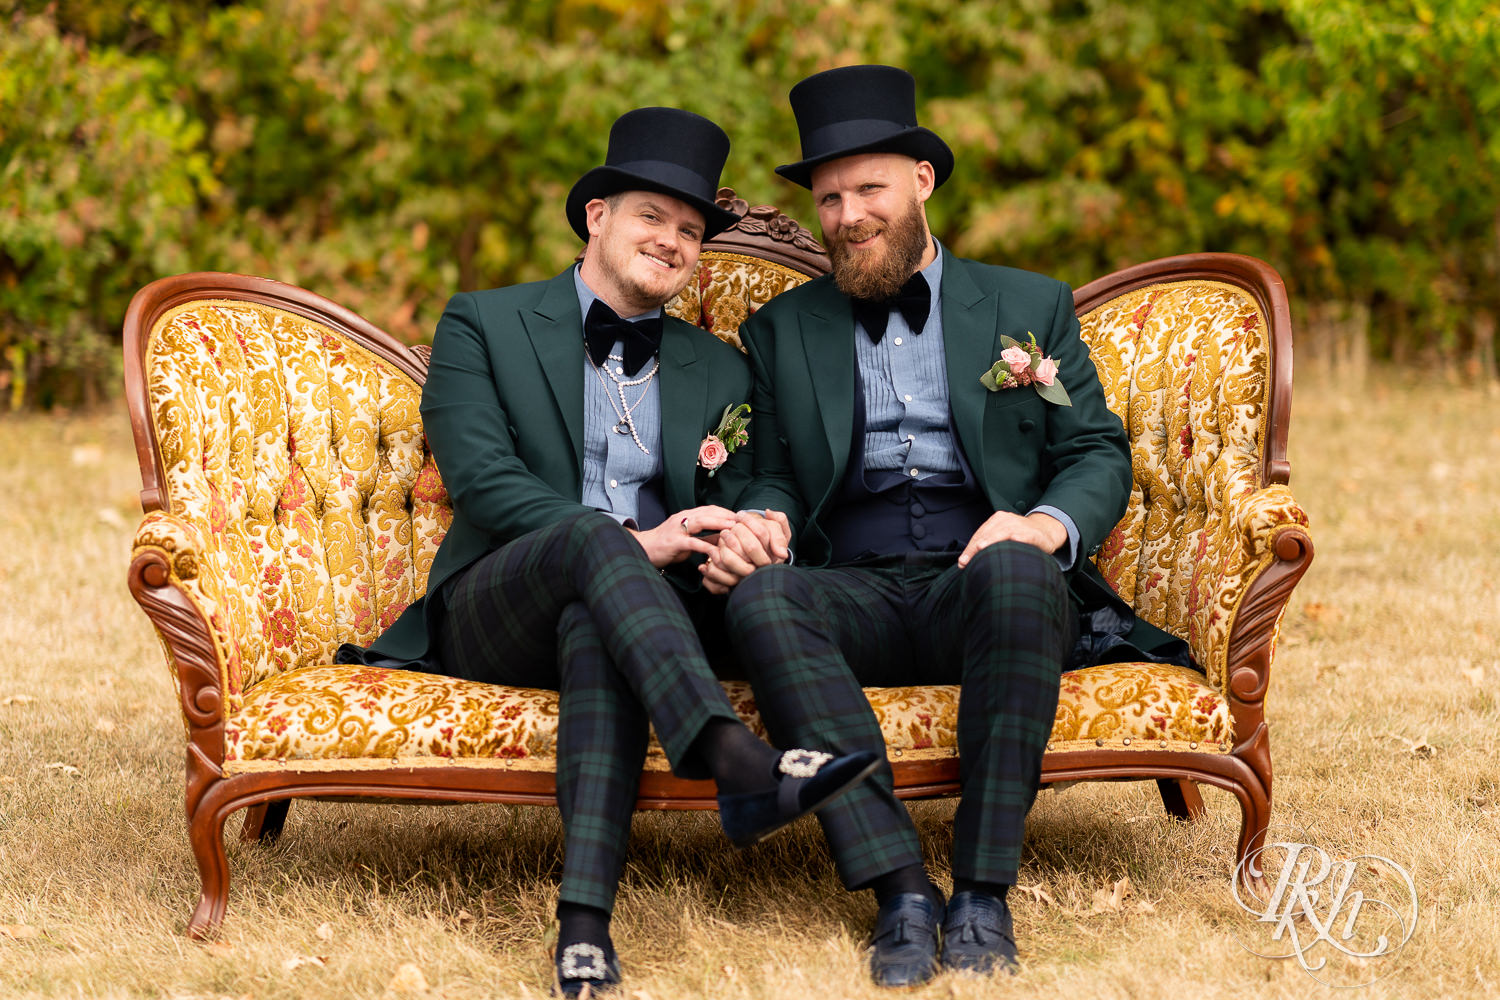 Grooms sitting on couch in field smiling and looking at the camera.